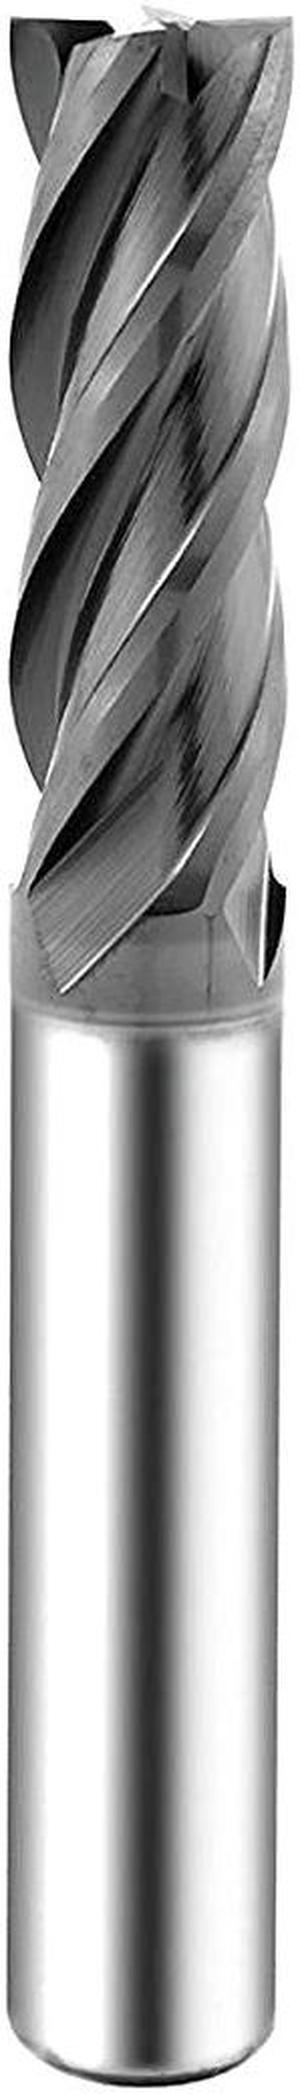 SPEED TIGER ISE Carbide Square End Mill - Micro Grain Carbide End Mill for Alloy Steels/Hardened Steels - 4 Flute - ISE5/16"4T - Made in Taiwan (1 Piece, 5/16")